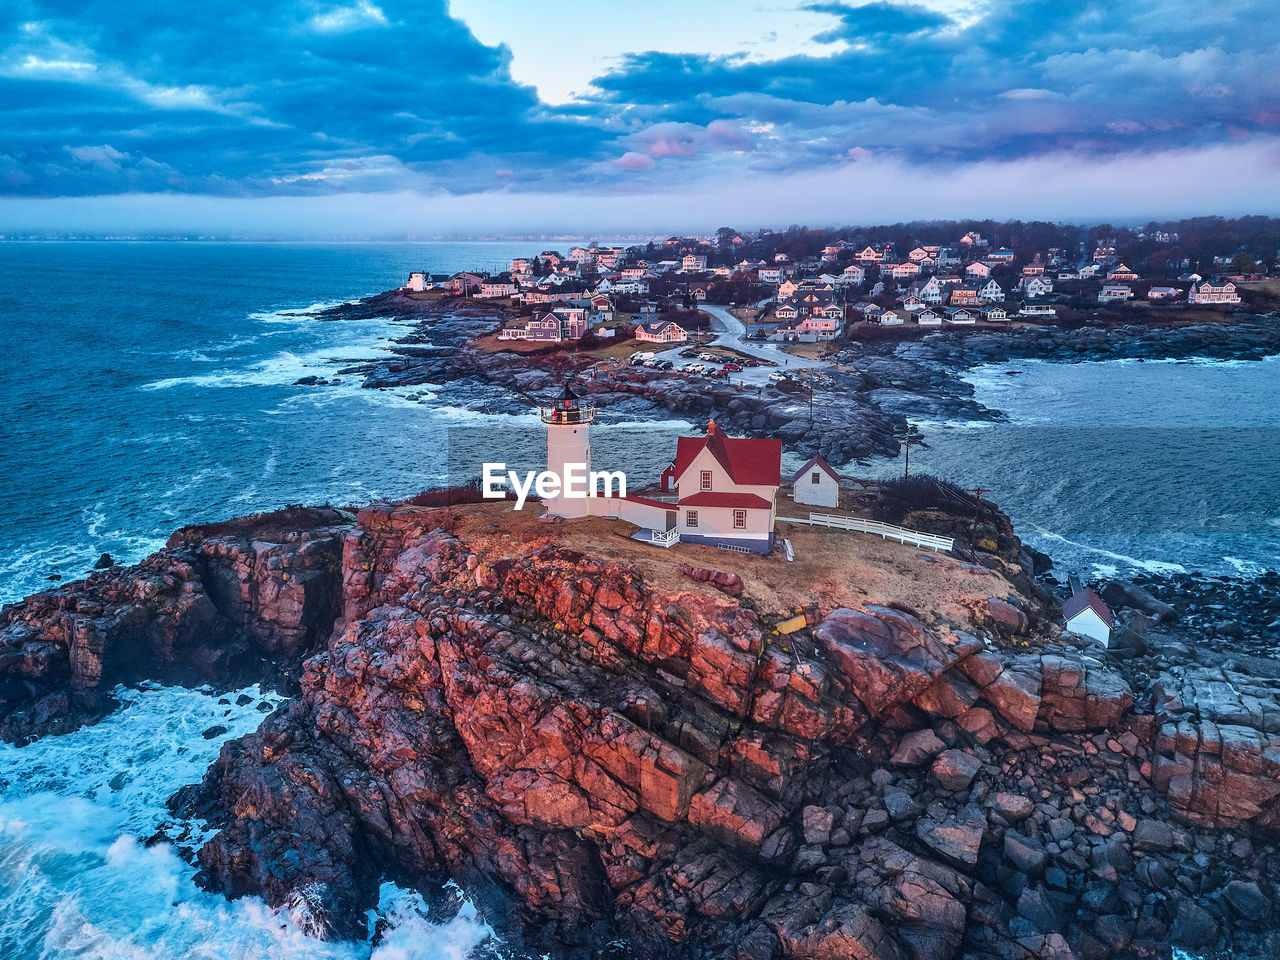 SCENIC VIEW OF SEA BY ROCKS AND BUILDINGS AGAINST SKY